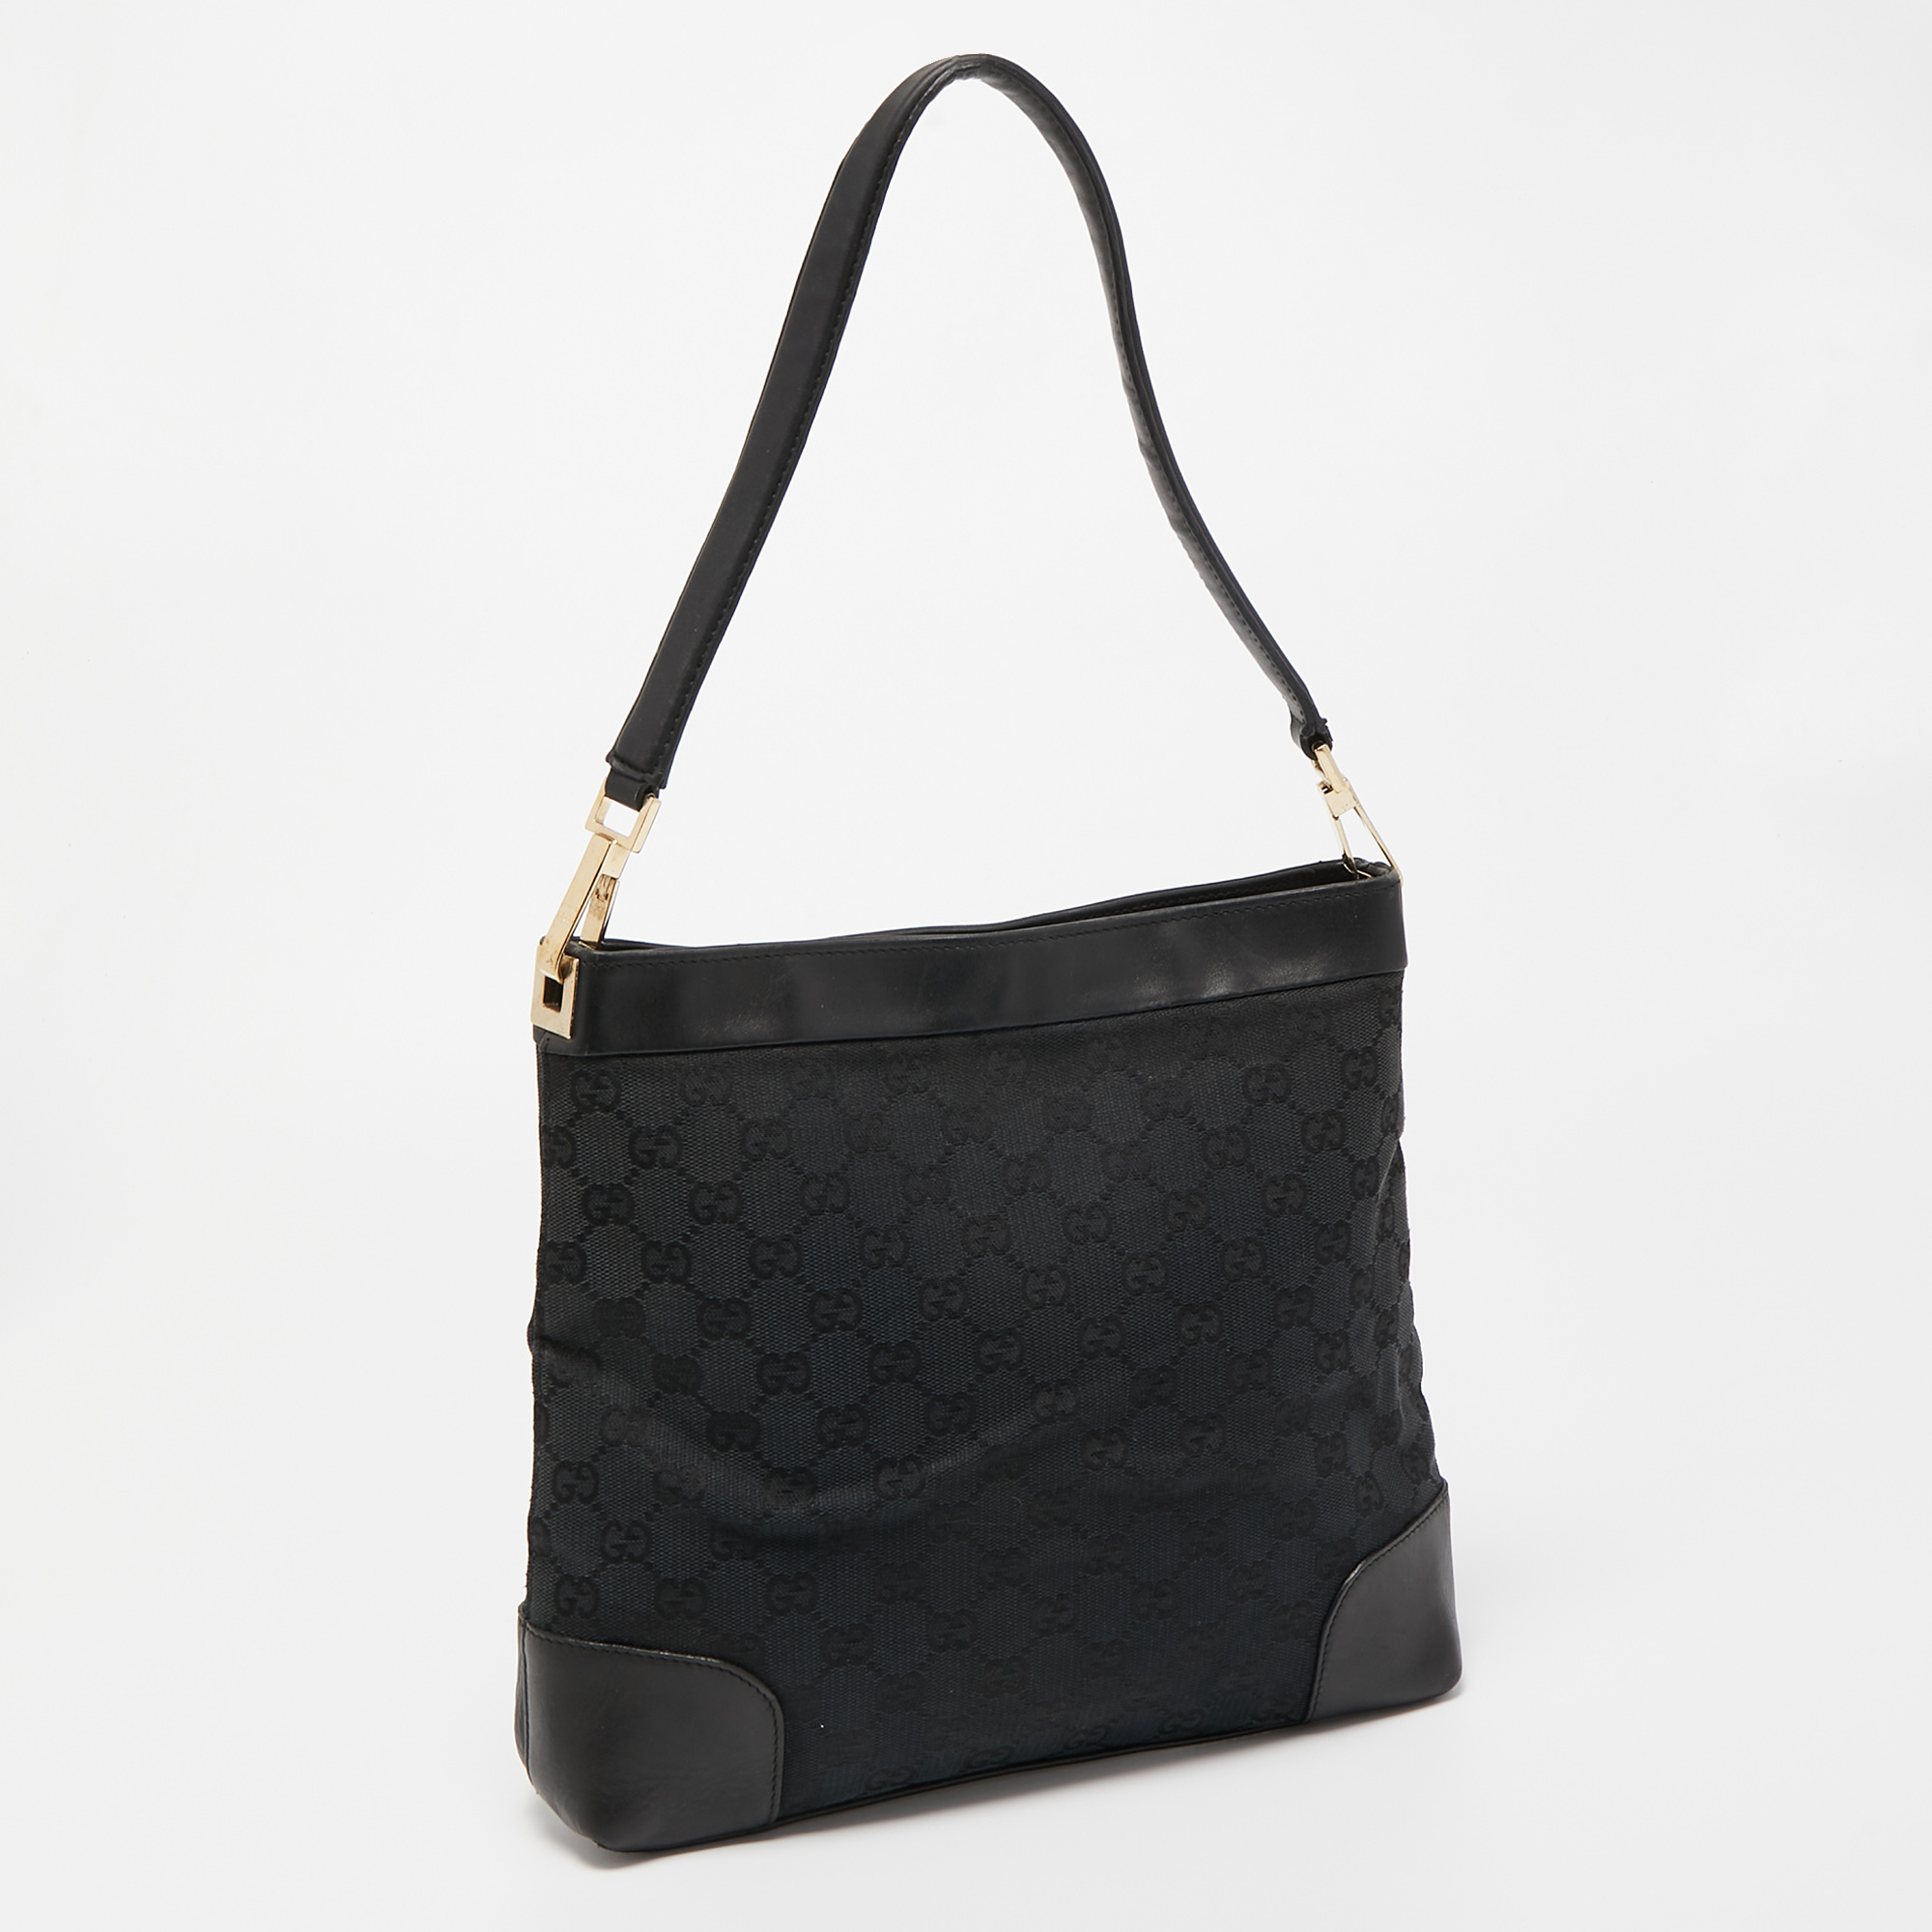 Gucci Black GG Canvas And Leather Shoulder Bag